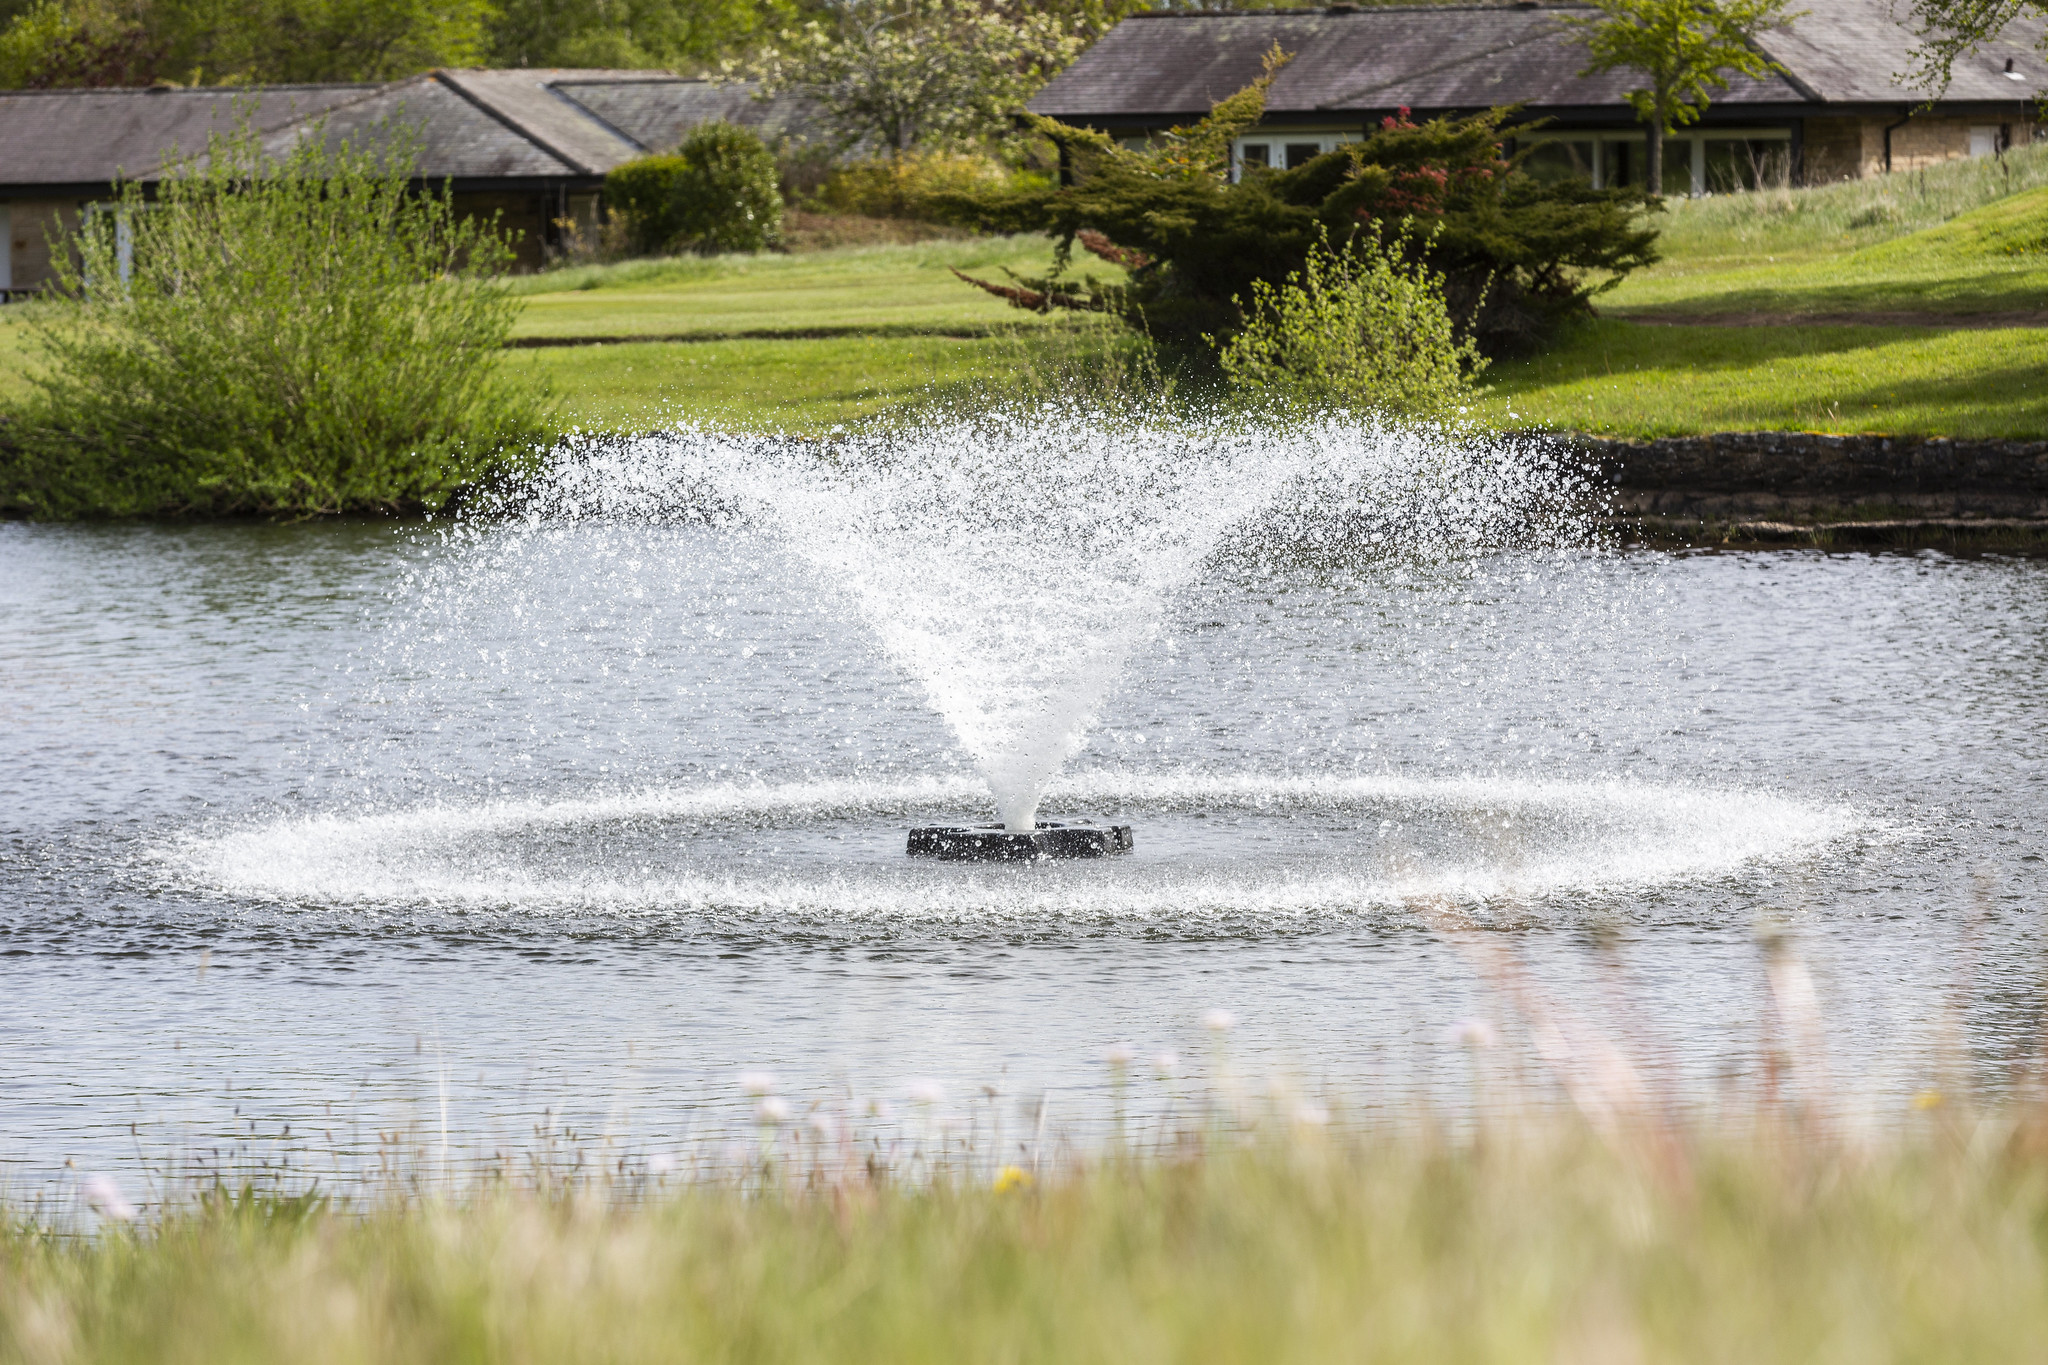 An Otterbine aerating fountain in a body of water in a housing estate.